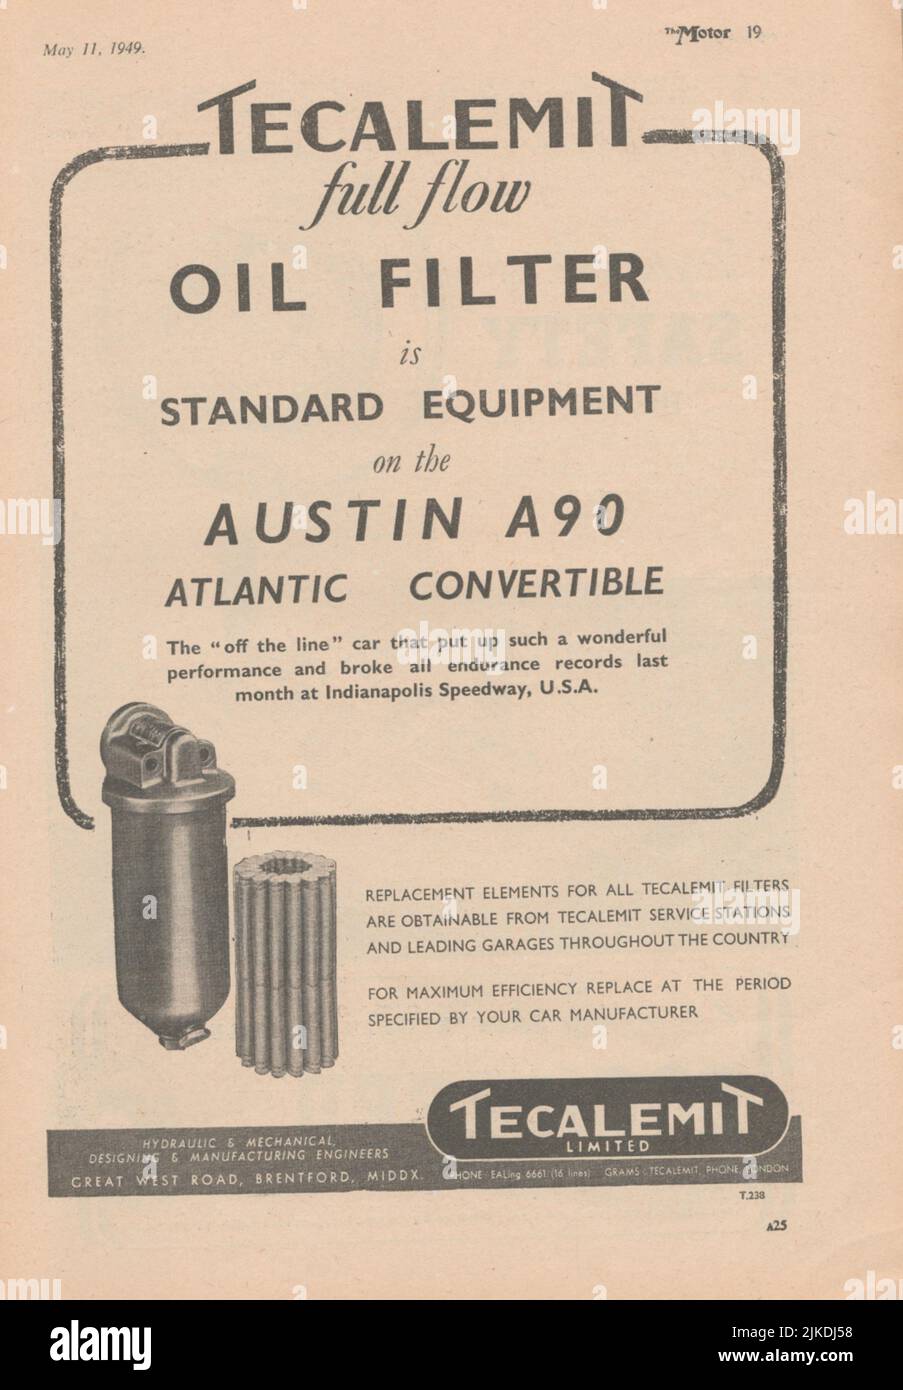 Tecalemit Oil filter old vintage advertisement from a UK car magazine Stock Photo